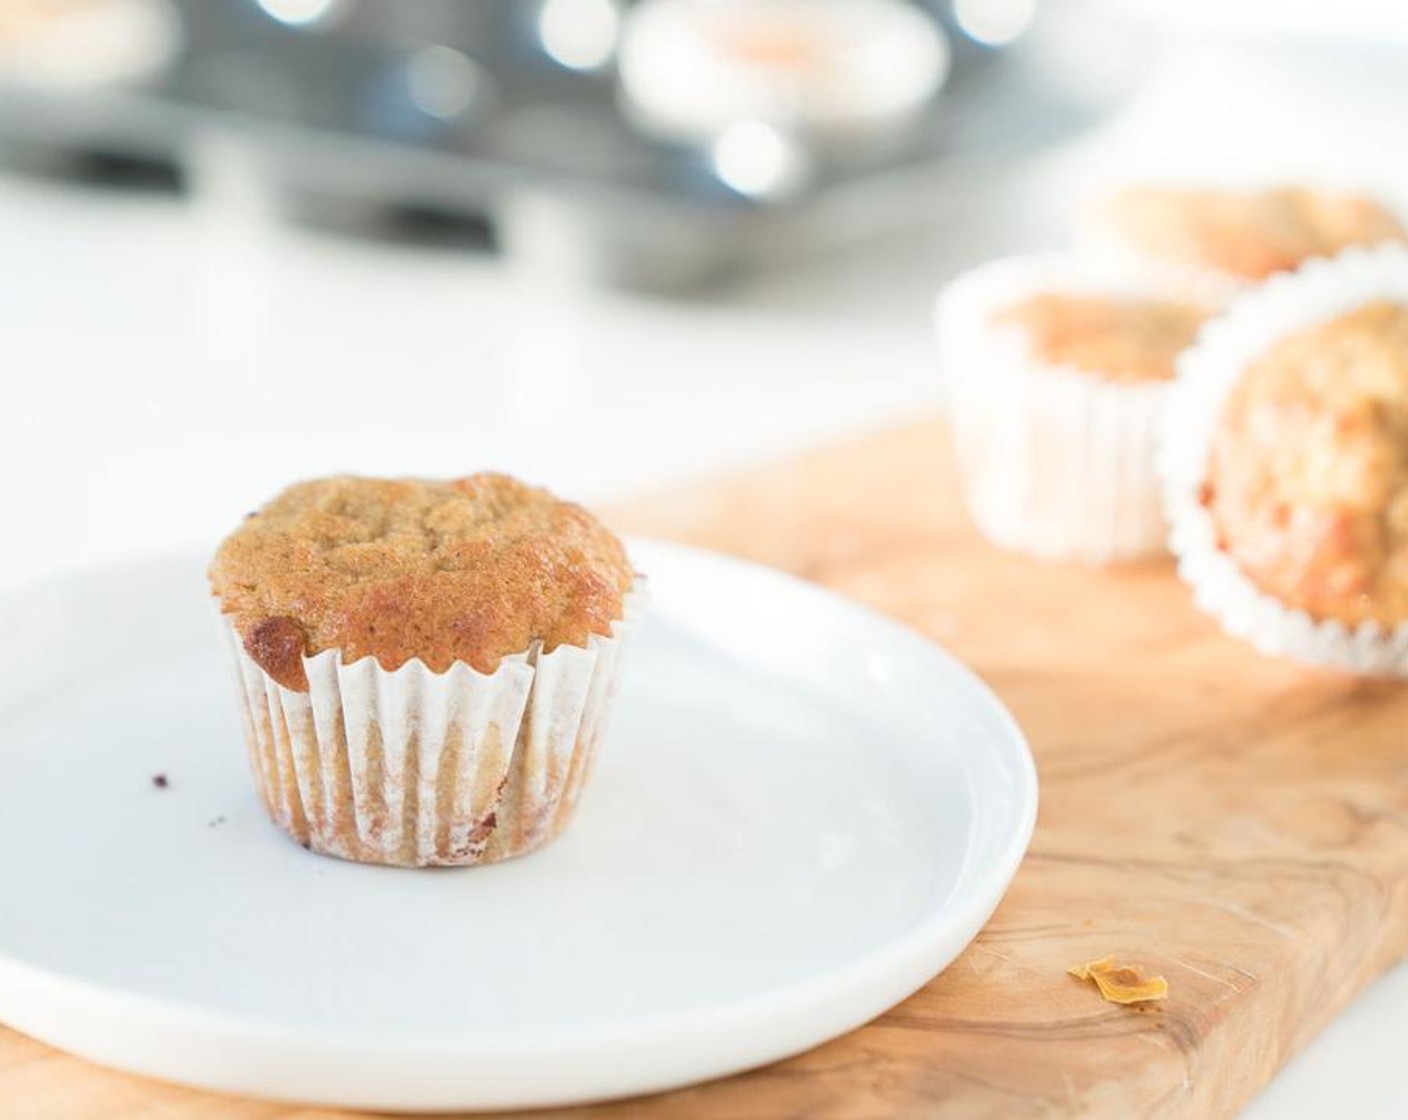 step 4 Place batter into muffin tin cups or grease a muffin tin. Bake for 15 to 20 minutes for mini muffins or 20 minutes for regular size or until a fork inserted into the middle of the muffin comes out clean.